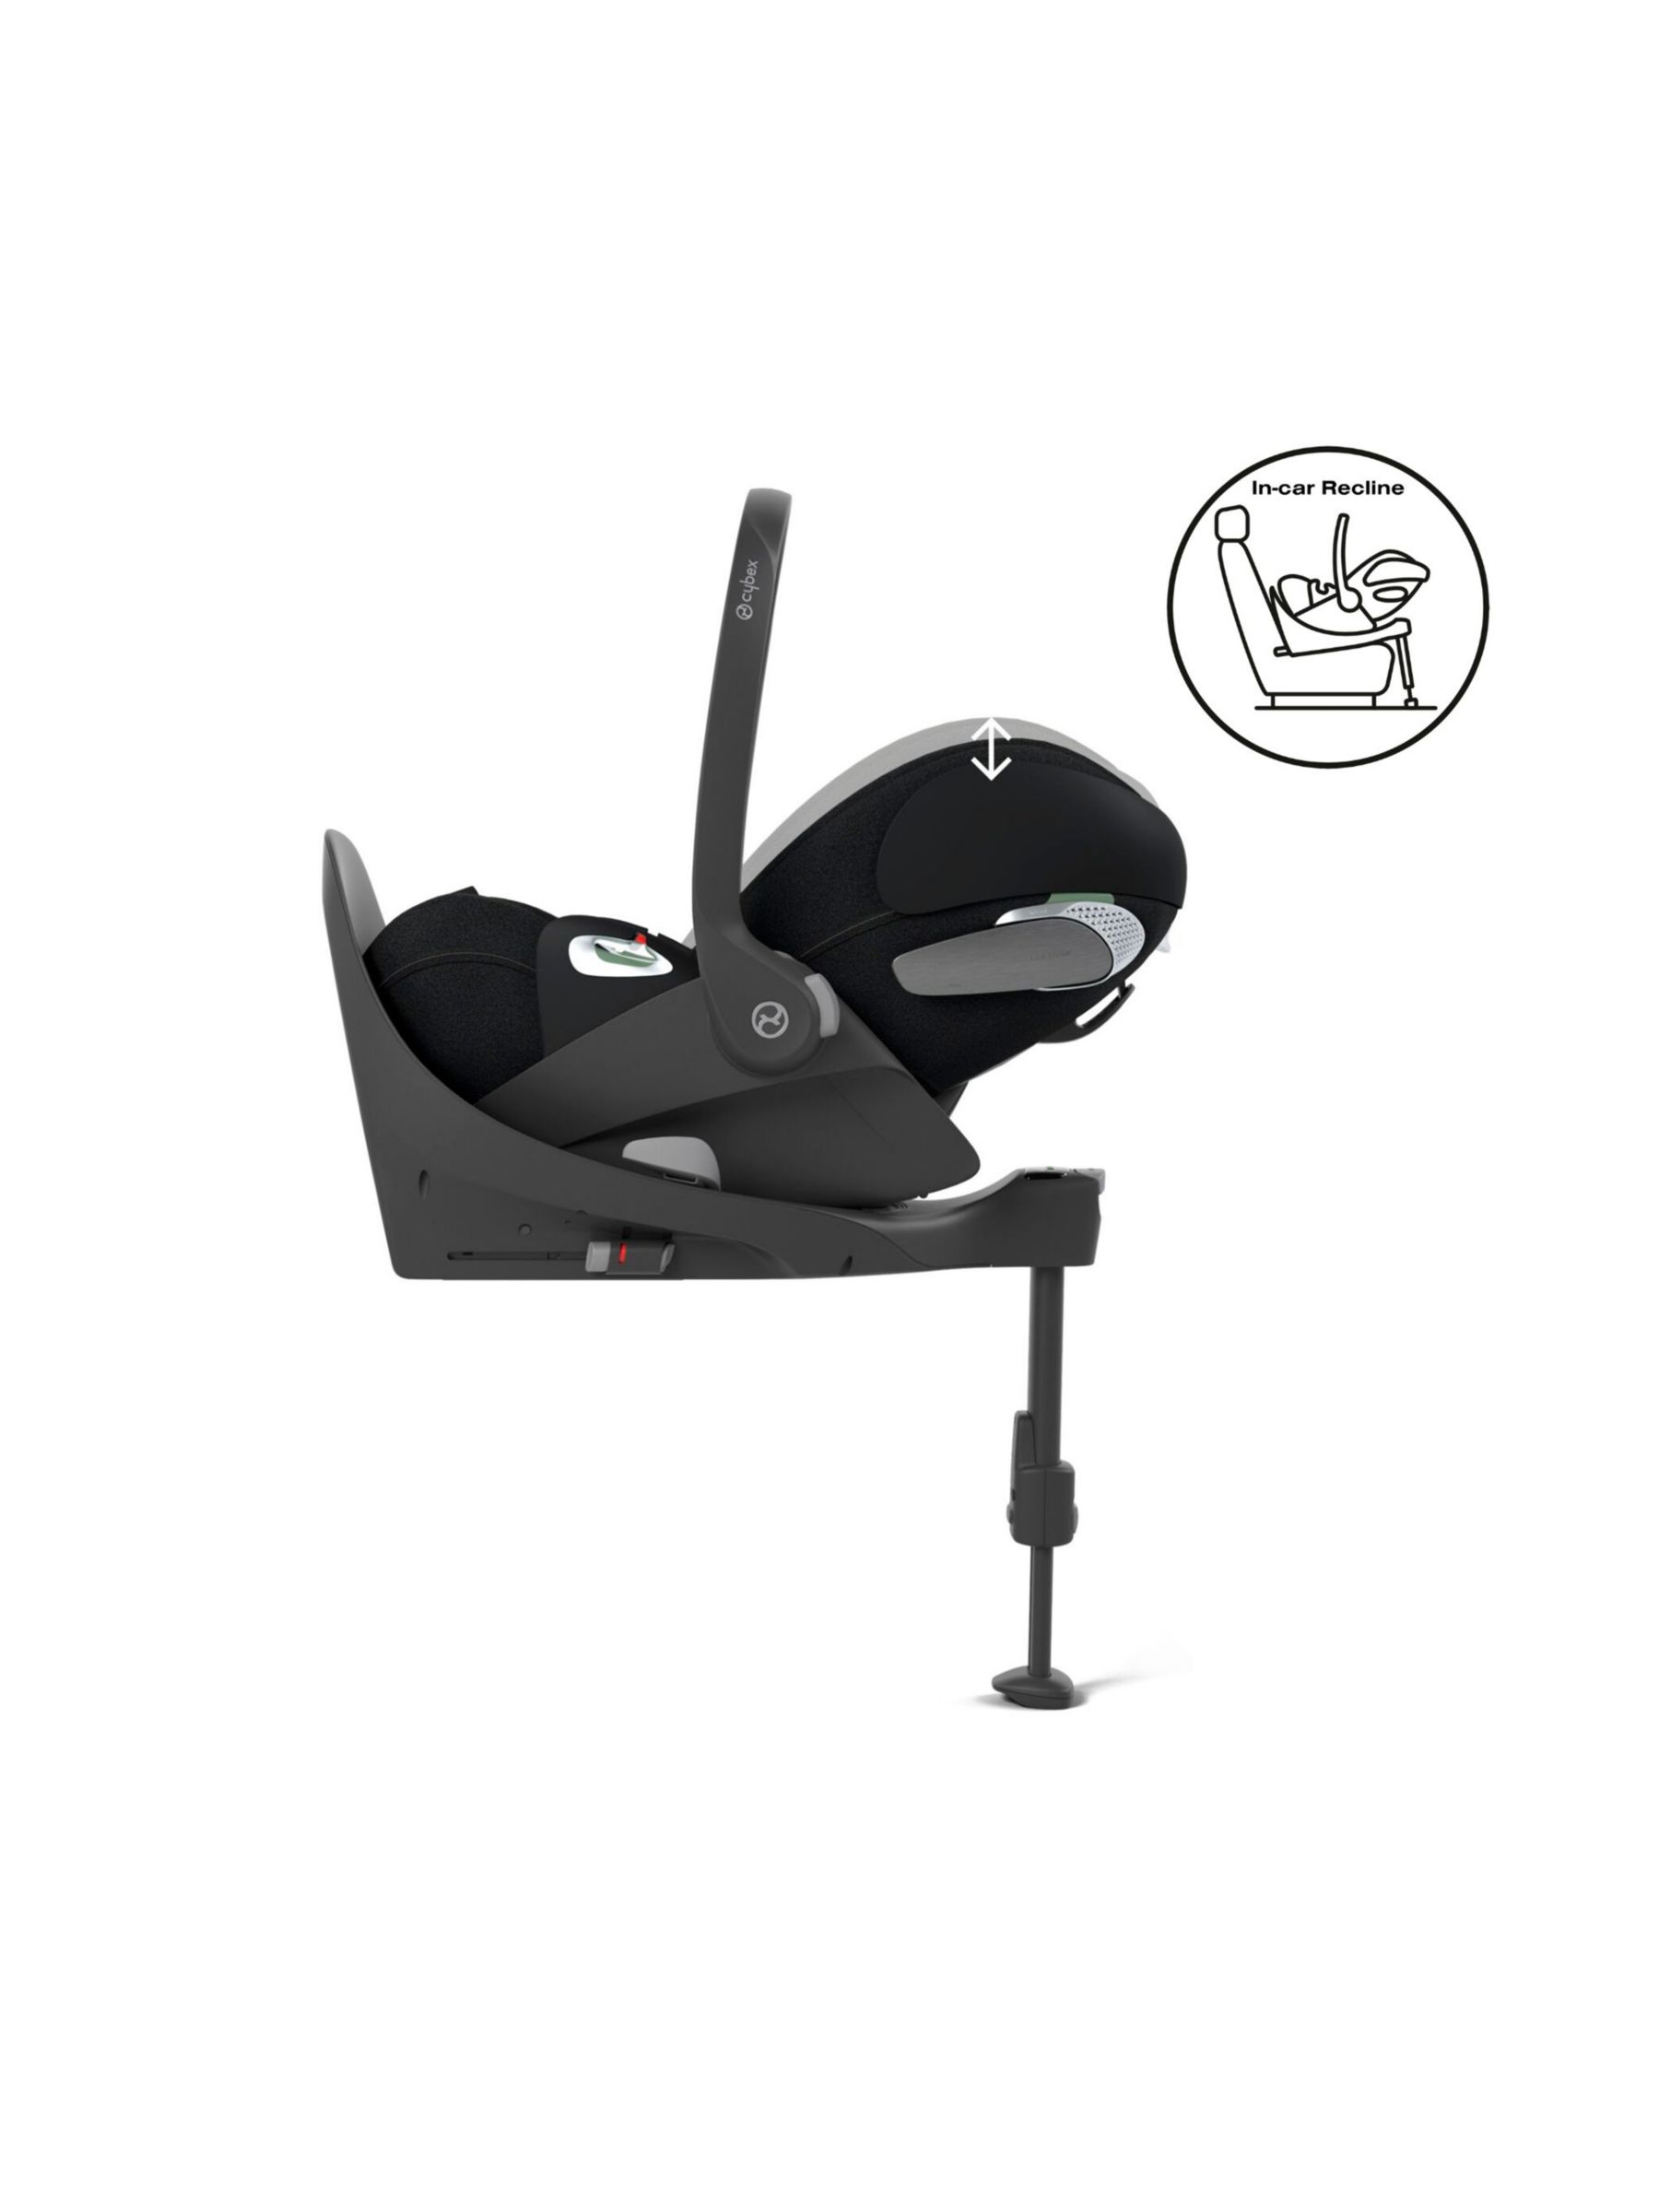 Cybex Priam Pushchair, Carrycot & Cloud T PLUS i-Size Car Seat with Base T Bundle, Rose Gold/ Sepia Black